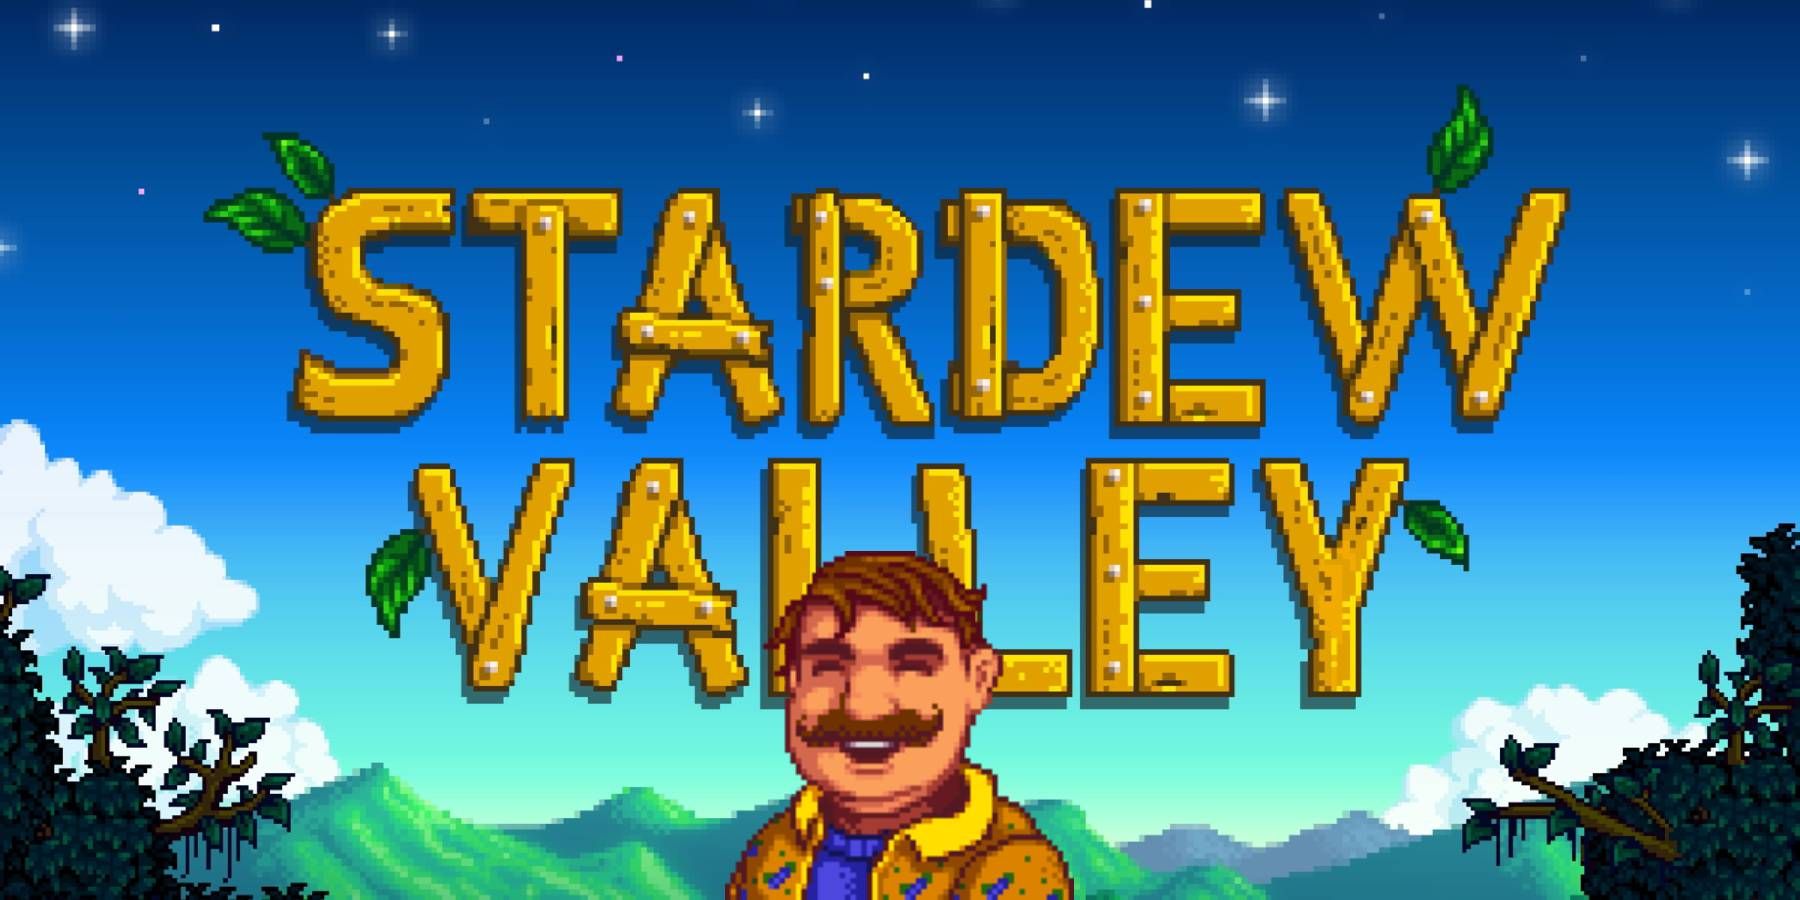 Gus from Stardew Valley with the game's logo